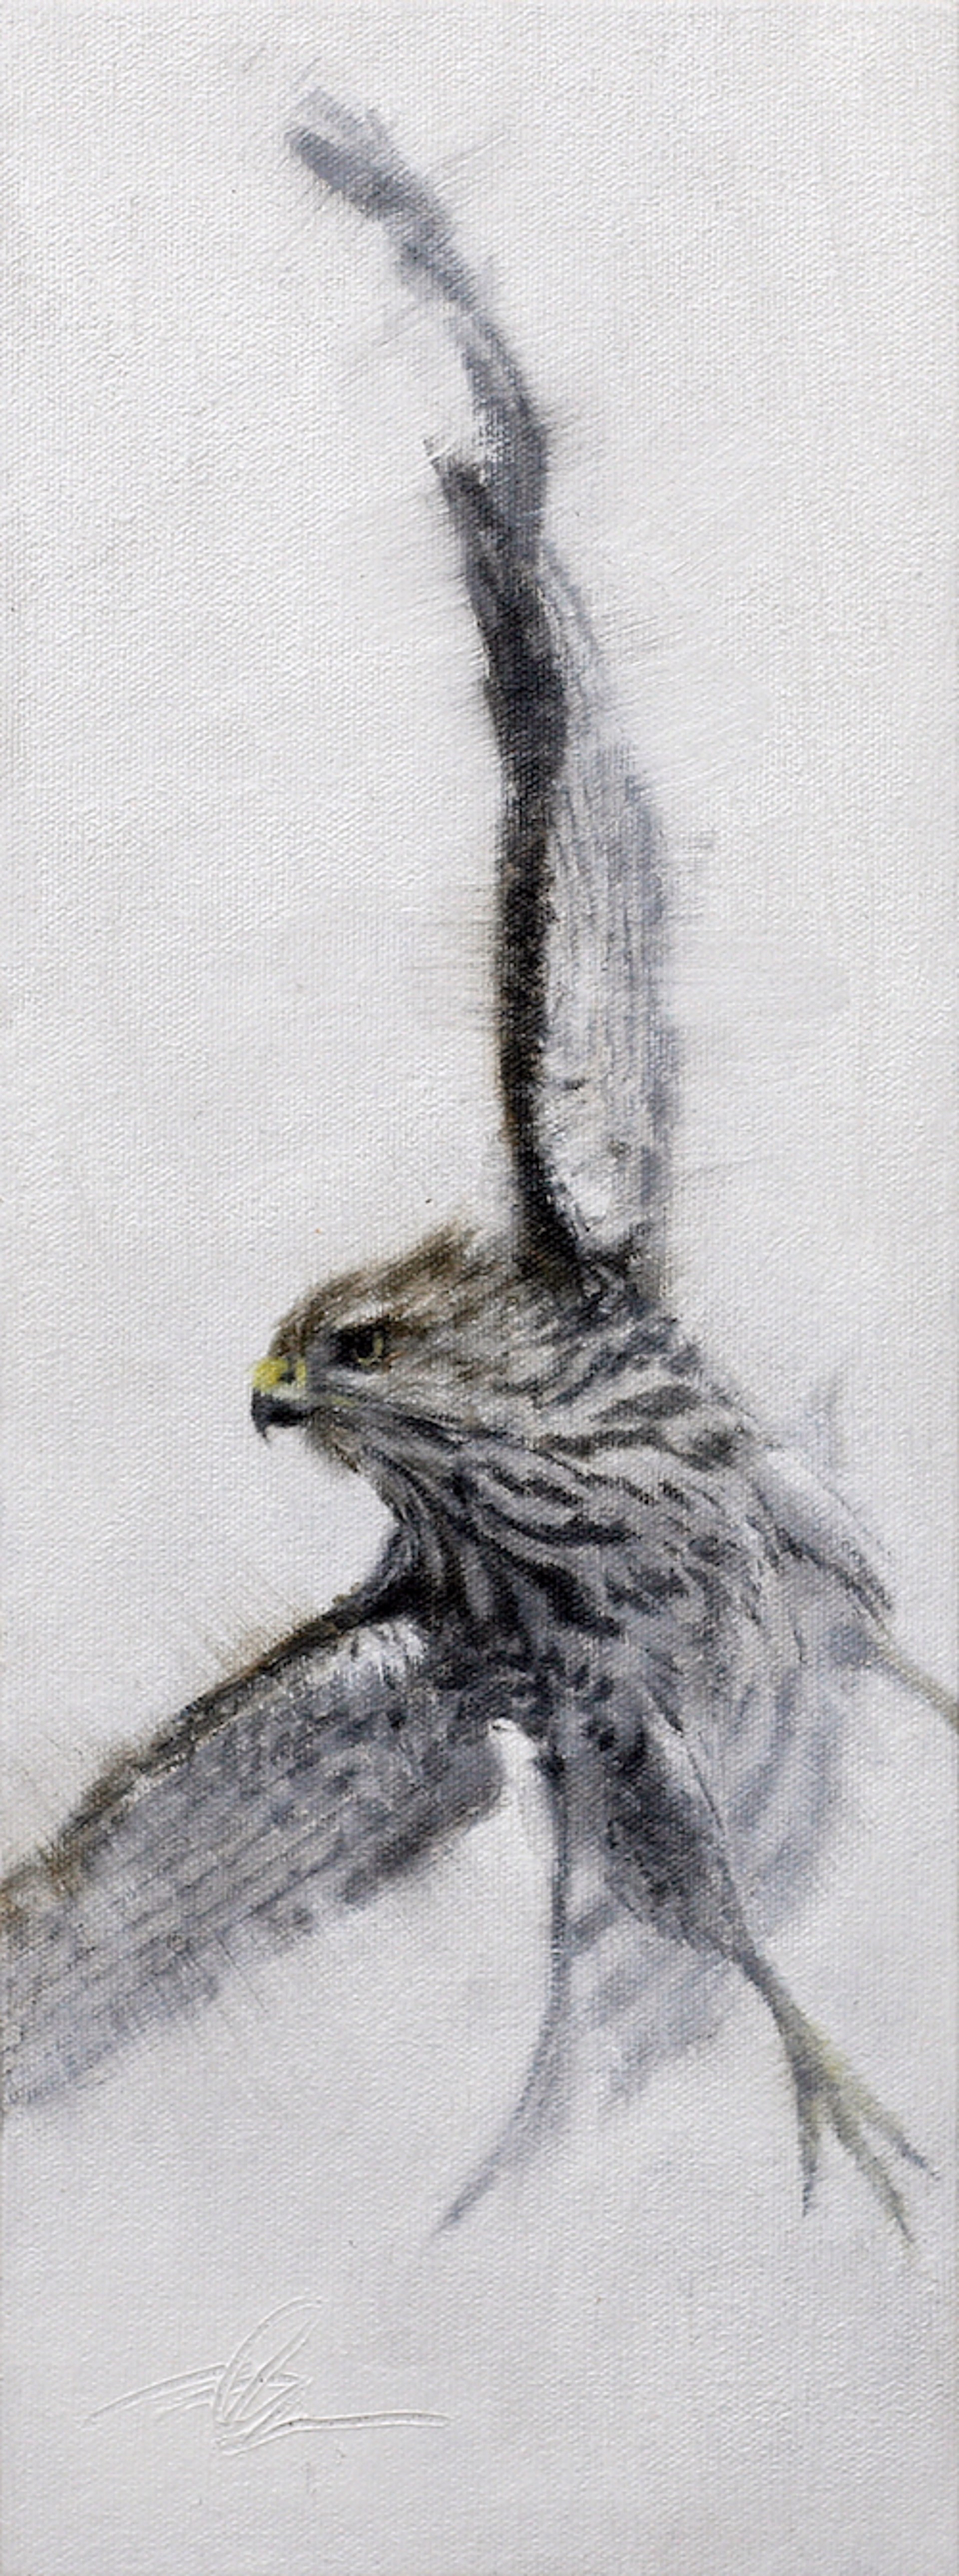 Original Oil Painting Of A Coopers Hawk In Flight Turning With One Wing Tip Up And The Other Down In Gray Scale